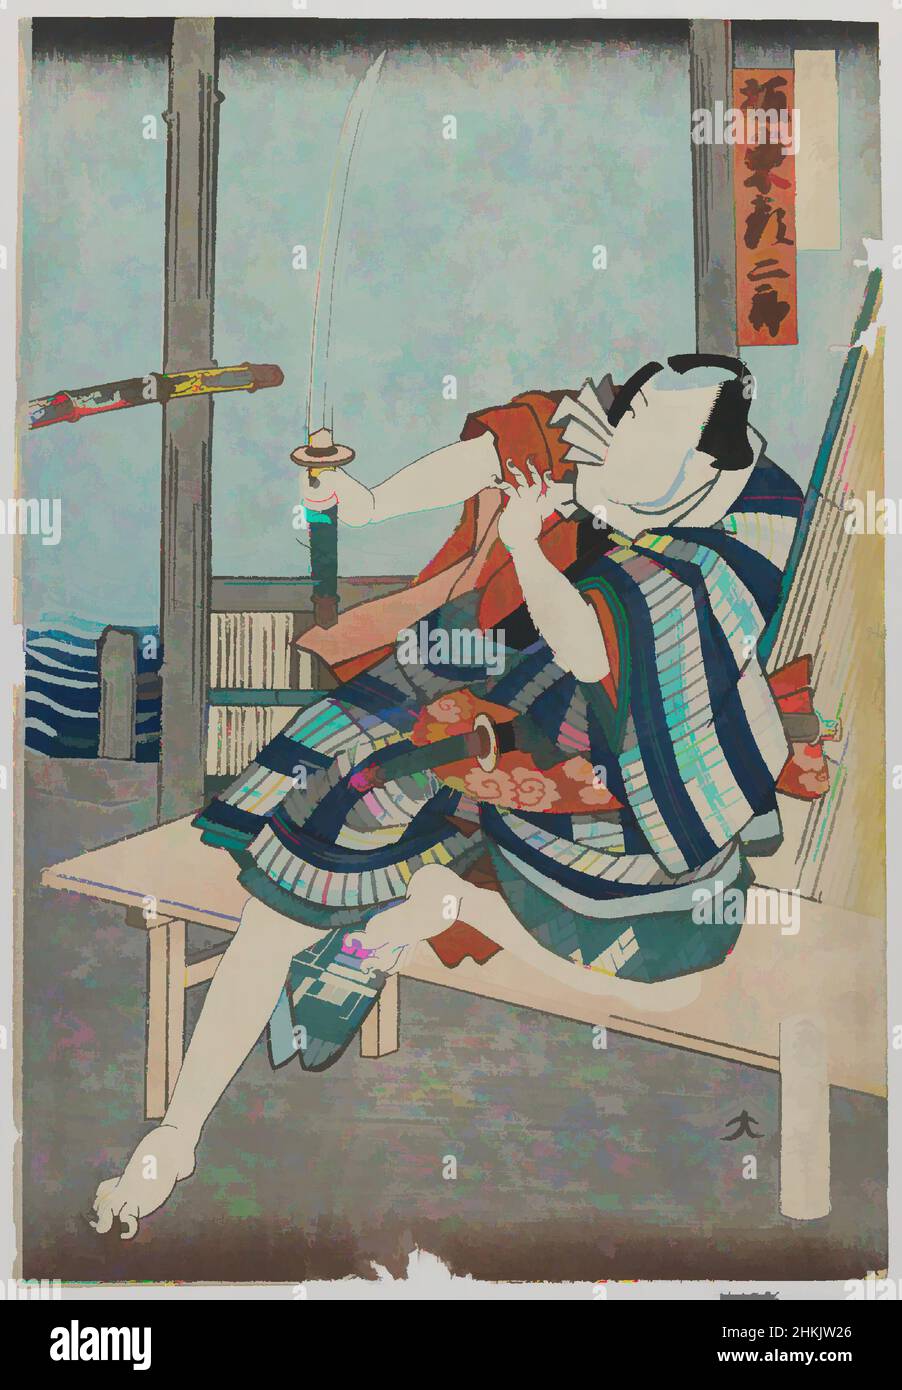 Art inspired by The Kabuki Actor Bando Hikusaburo V, 1832-1877, Toyohara Kunichika, Japanese, 1835-1900, Woodblock print; one leaf of a triptych?, Japan, 1866 first month, Edo Period, 14 x 9 5/8 in., 35.6 x 24.4 cm, Acting, Actor, Costume, Edo Period, Japan, Japanese, Kabuki, Katana, Classic works modernized by Artotop with a splash of modernity. Shapes, color and value, eye-catching visual impact on art. Emotions through freedom of artworks in a contemporary way. A timeless message pursuing a wildly creative new direction. Artists turning to the digital medium and creating the Artotop NFT Stock Photo